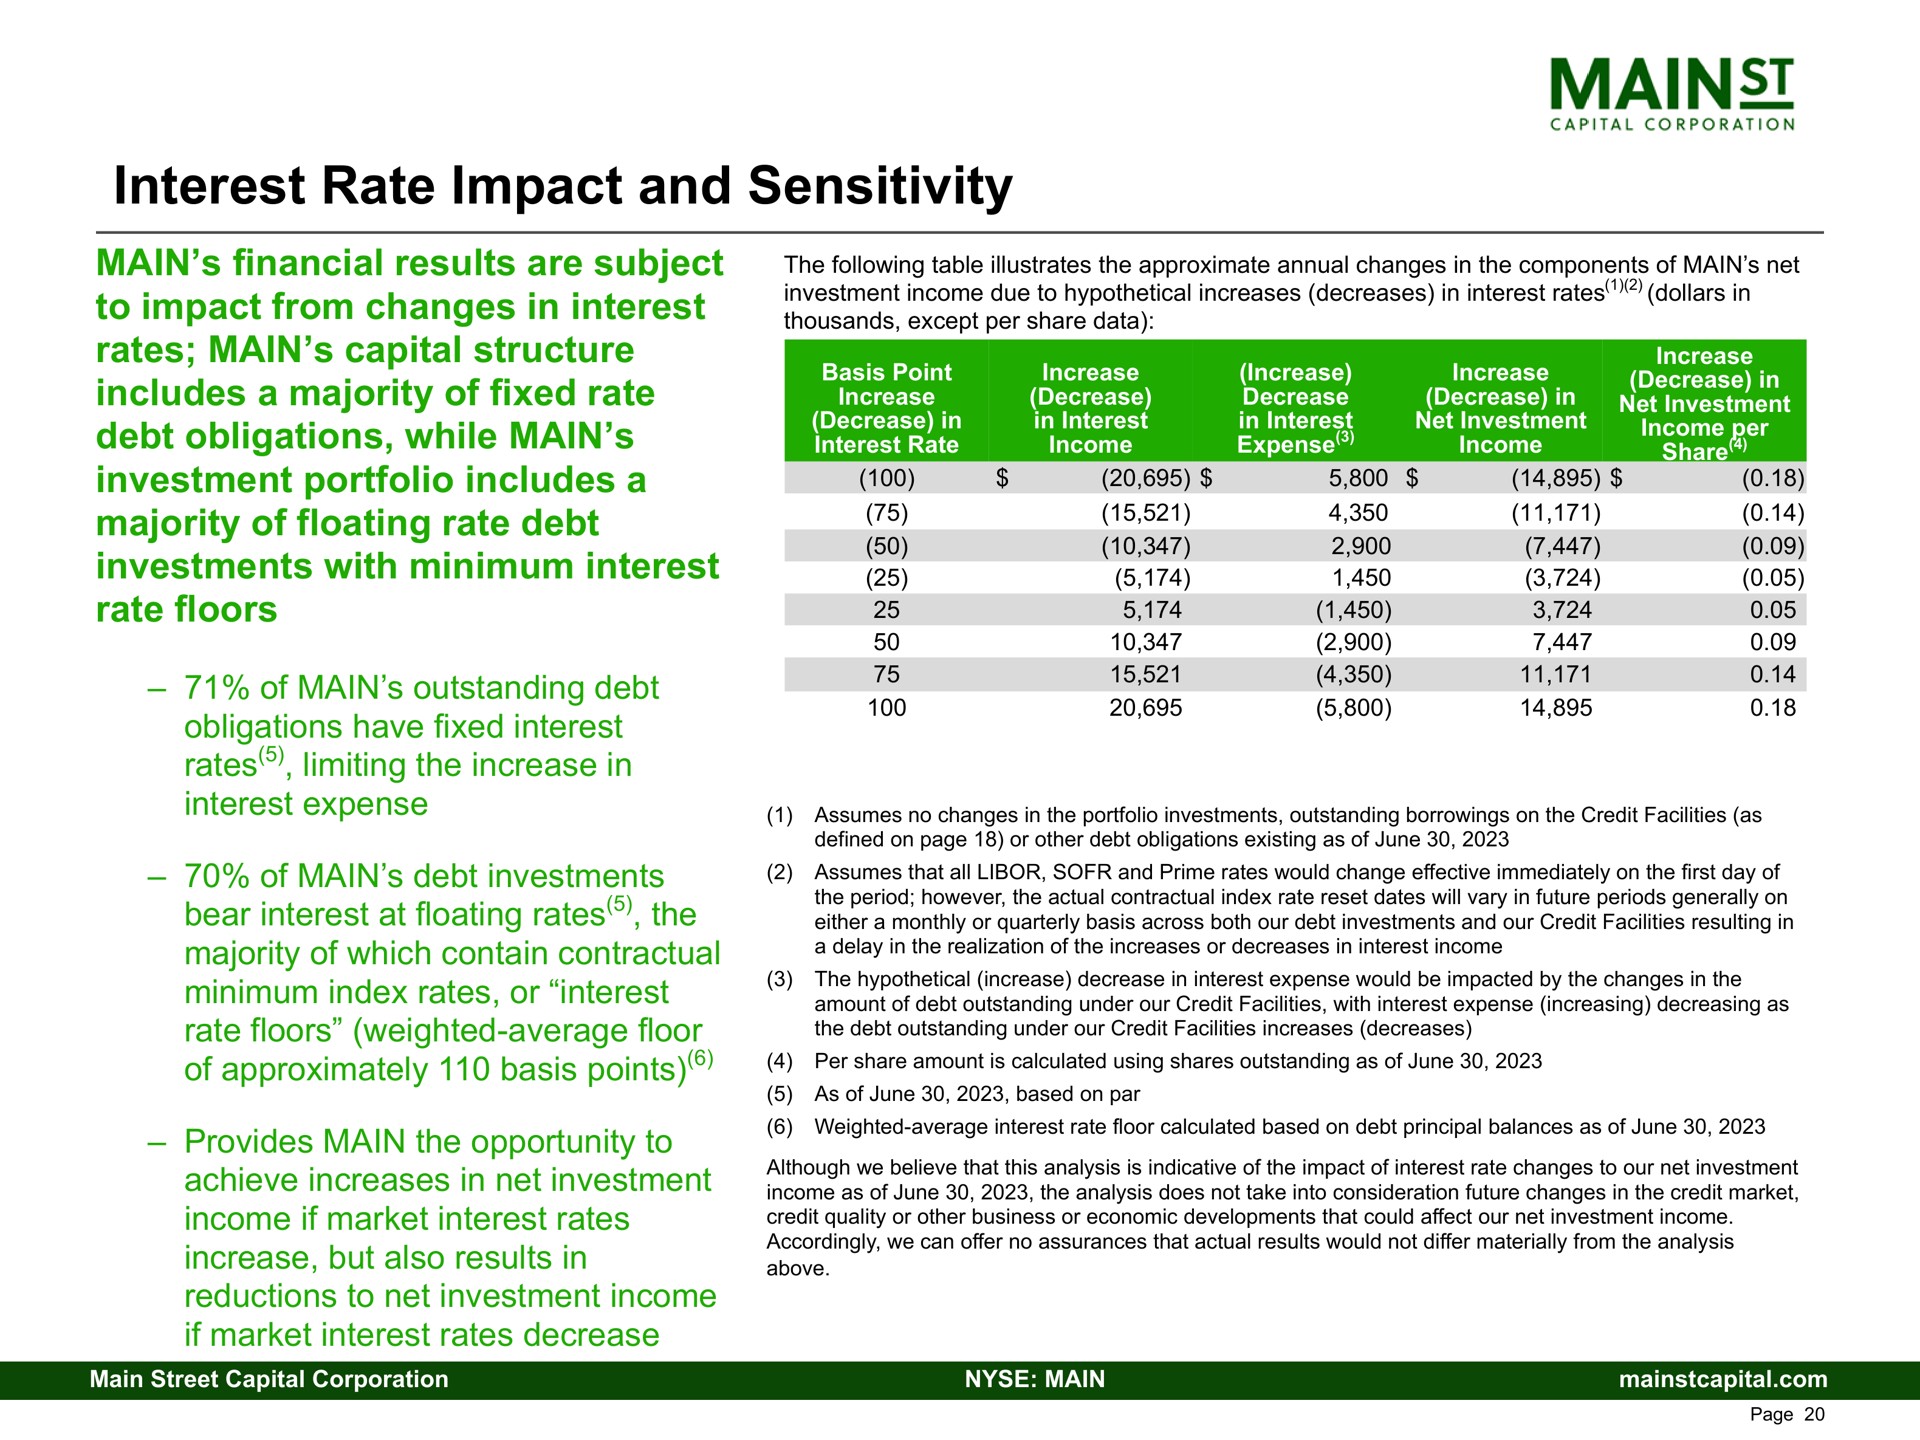 interest rate impact and sensitivity main financial results are subject to impact from changes in interest rates main capital structure includes a majority of fixed rate debt obligations while main investment portfolio includes a majority of floating rate debt investments with minimum interest rate floors | Main Street Capital